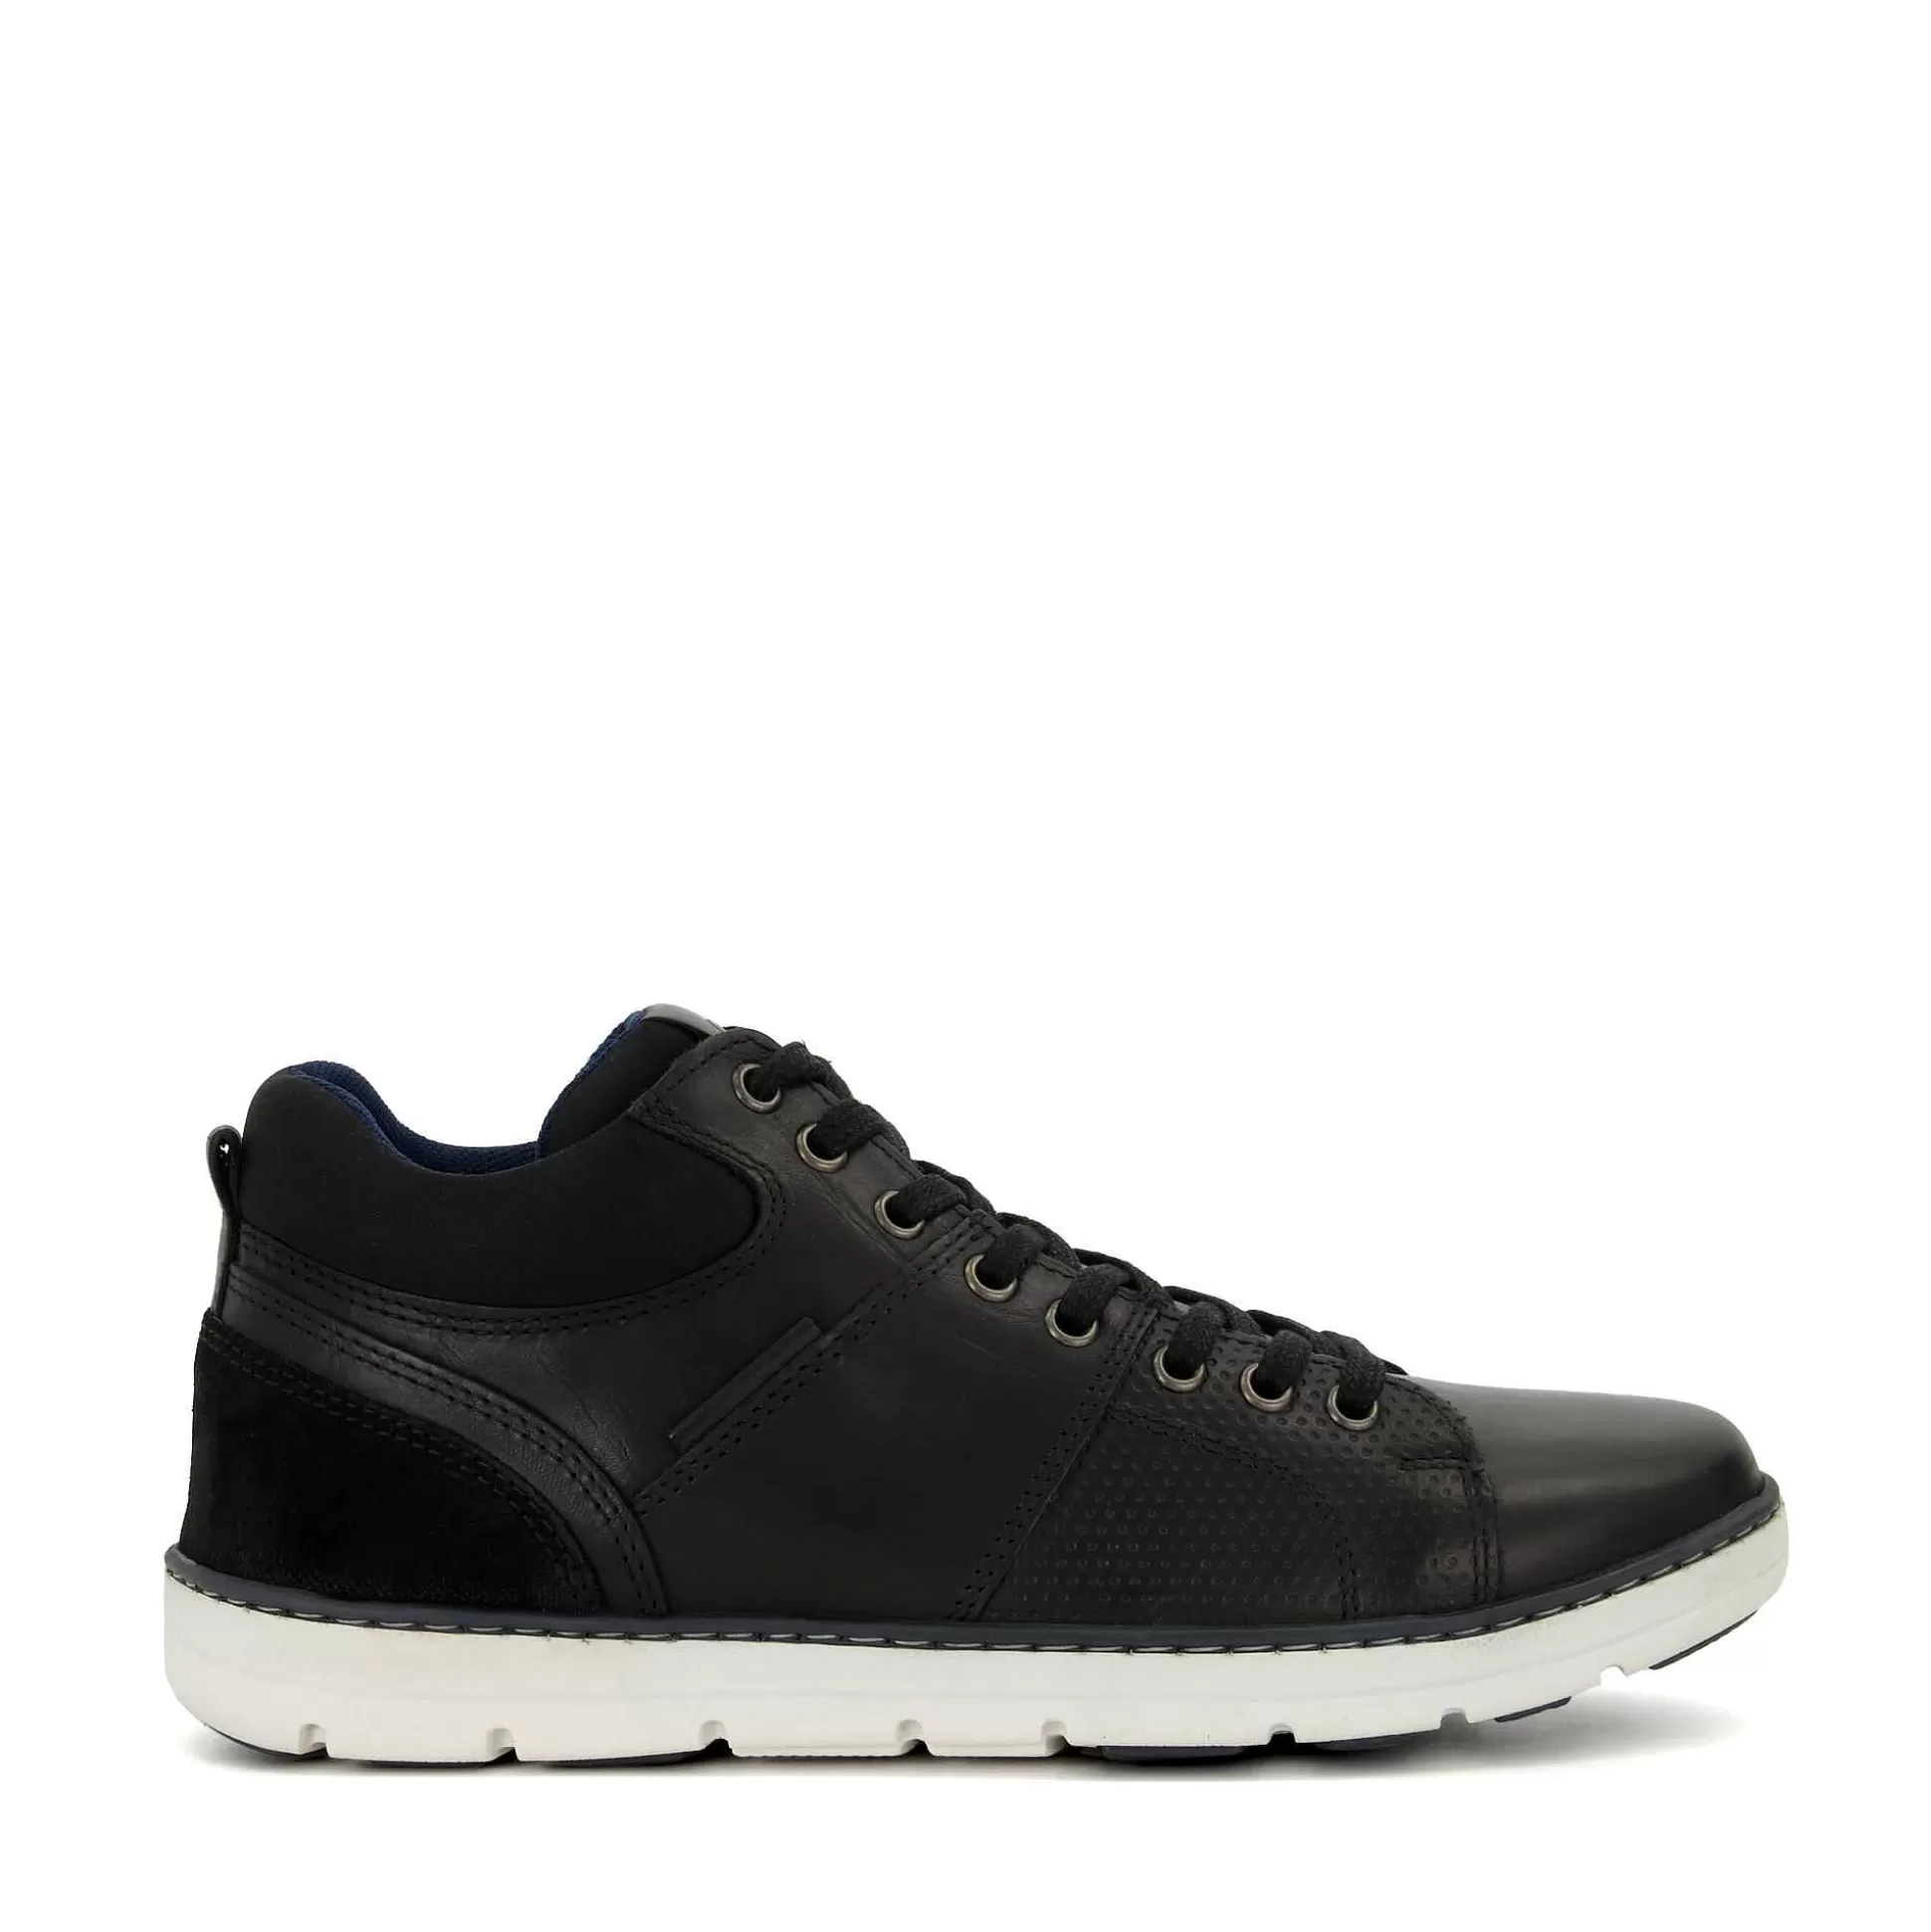 Dune London STATTER - BLACK-Men Casual Shoes | Trainers